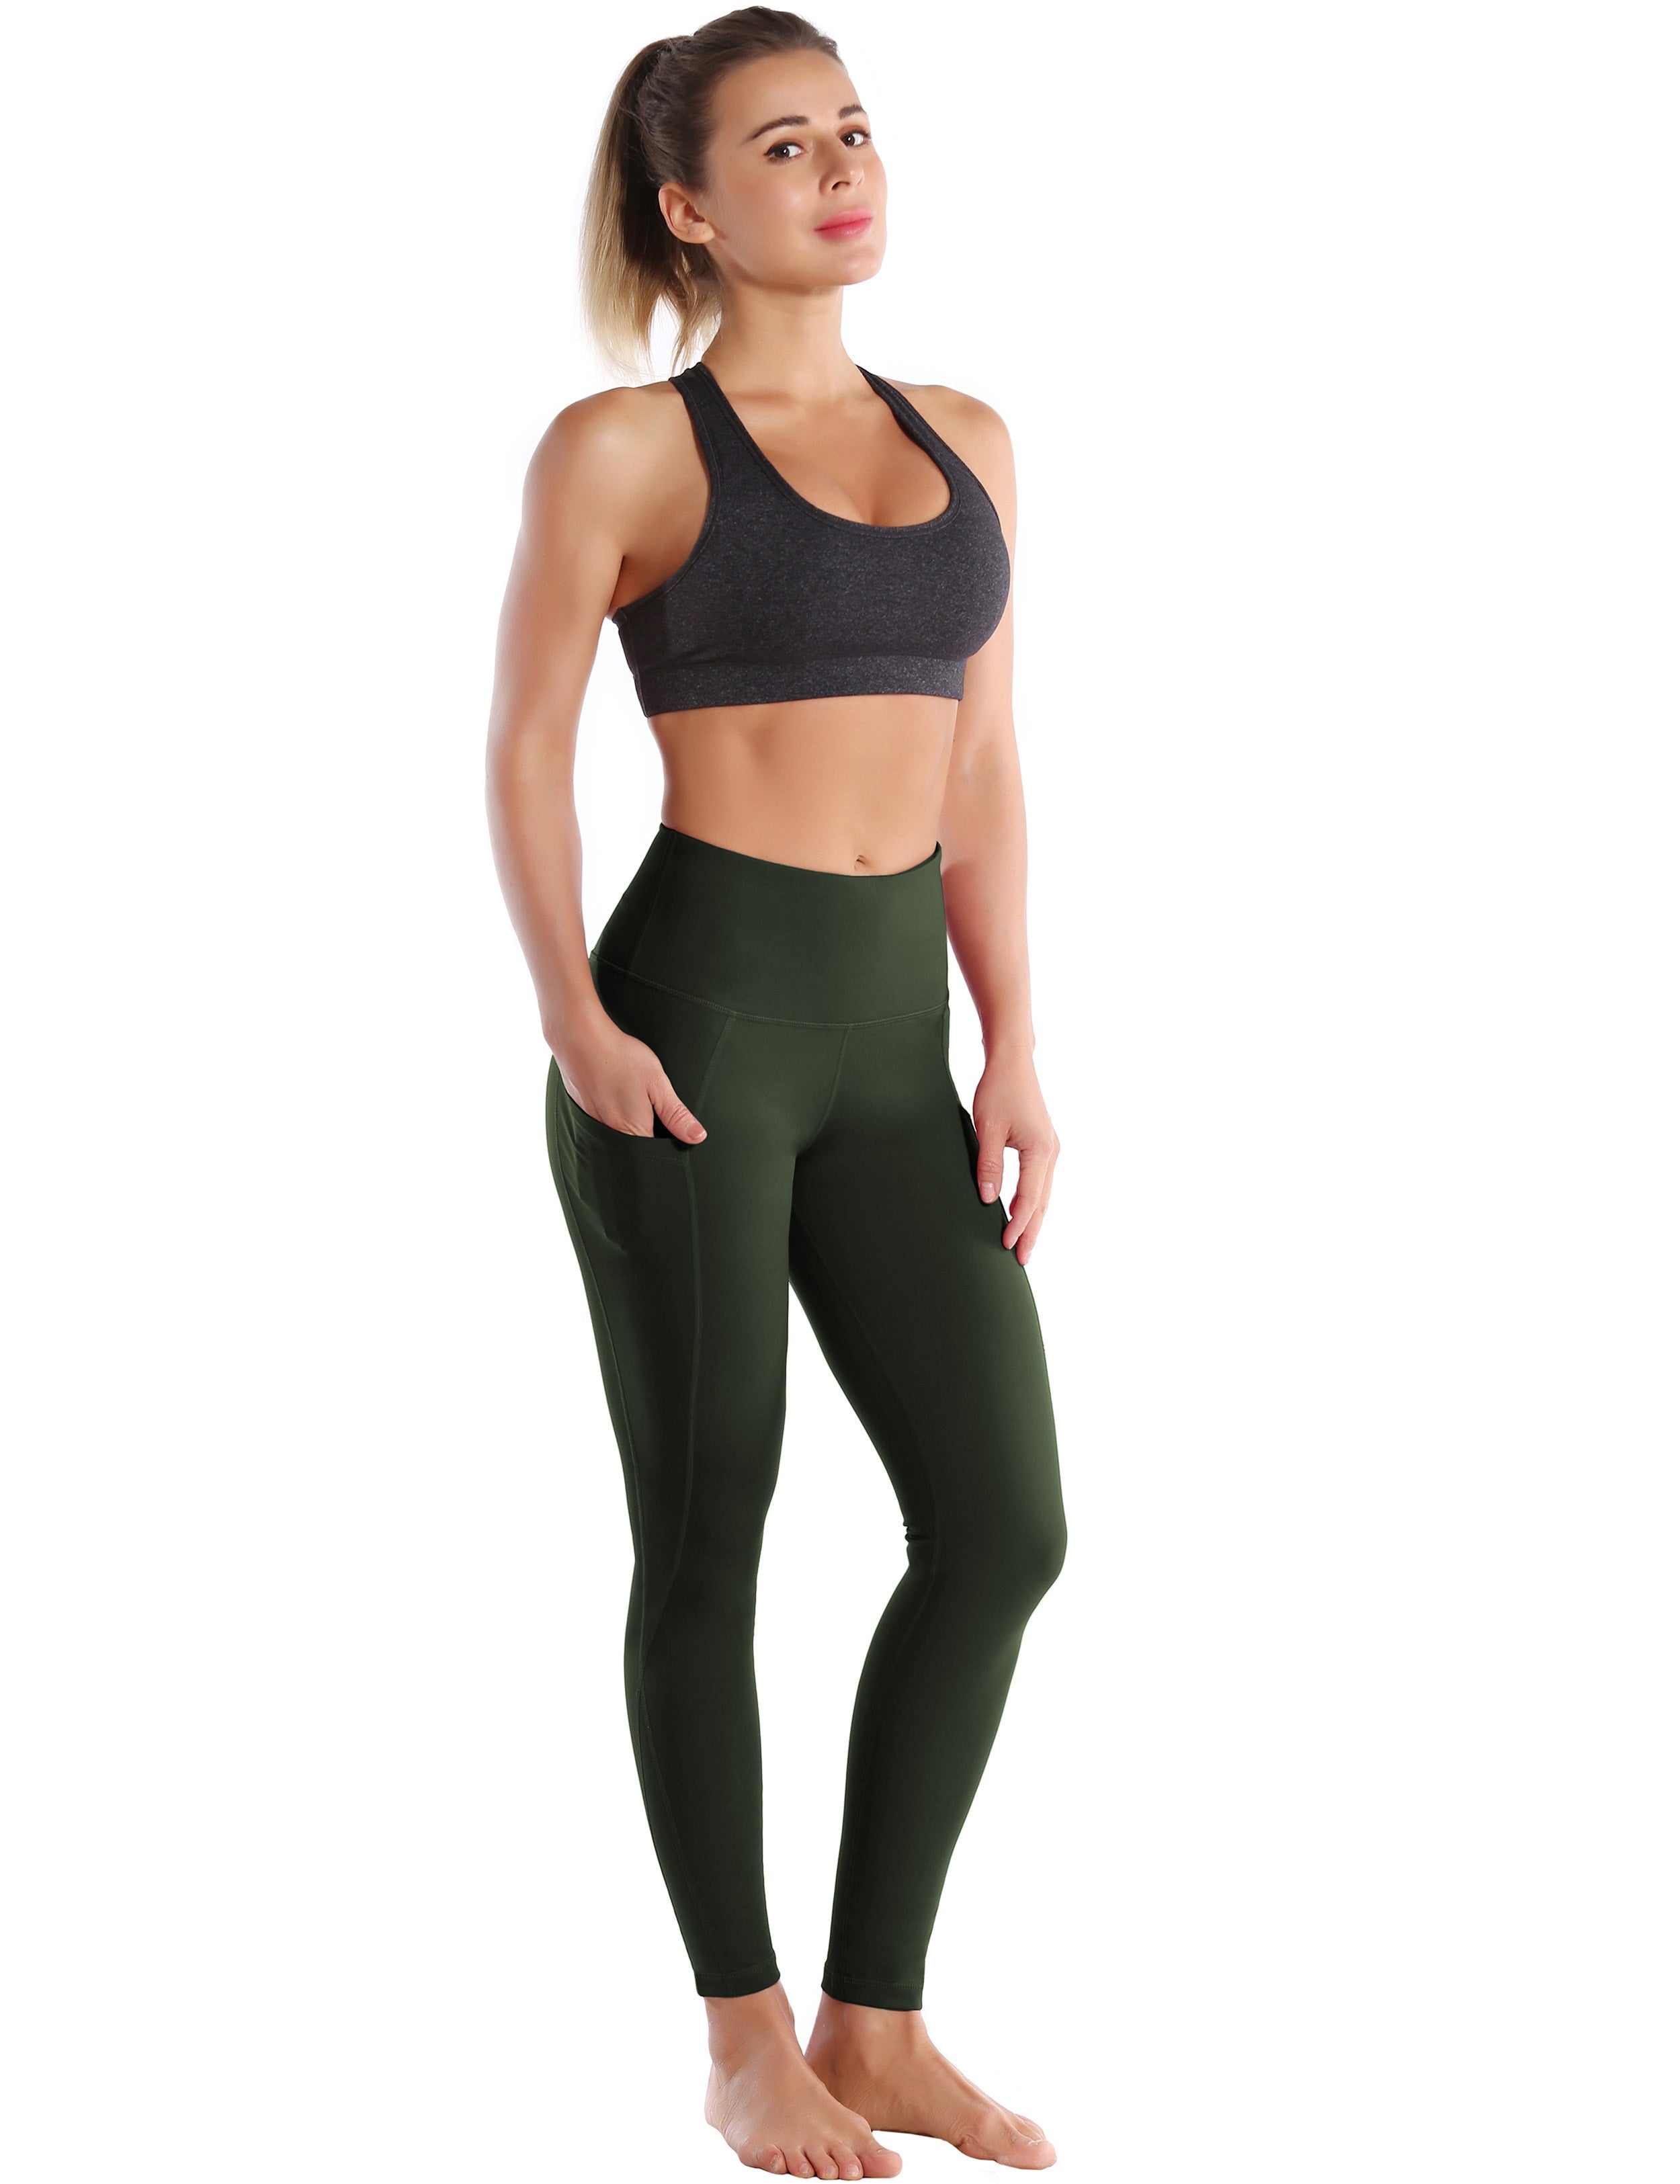 High Waist Side Pockets Yoga Pants olivegray 75% Nylon, 25% Spandex Fabric doesn't attract lint easily 4-way stretch No see-through Moisture-wicking Tummy control Inner pocket